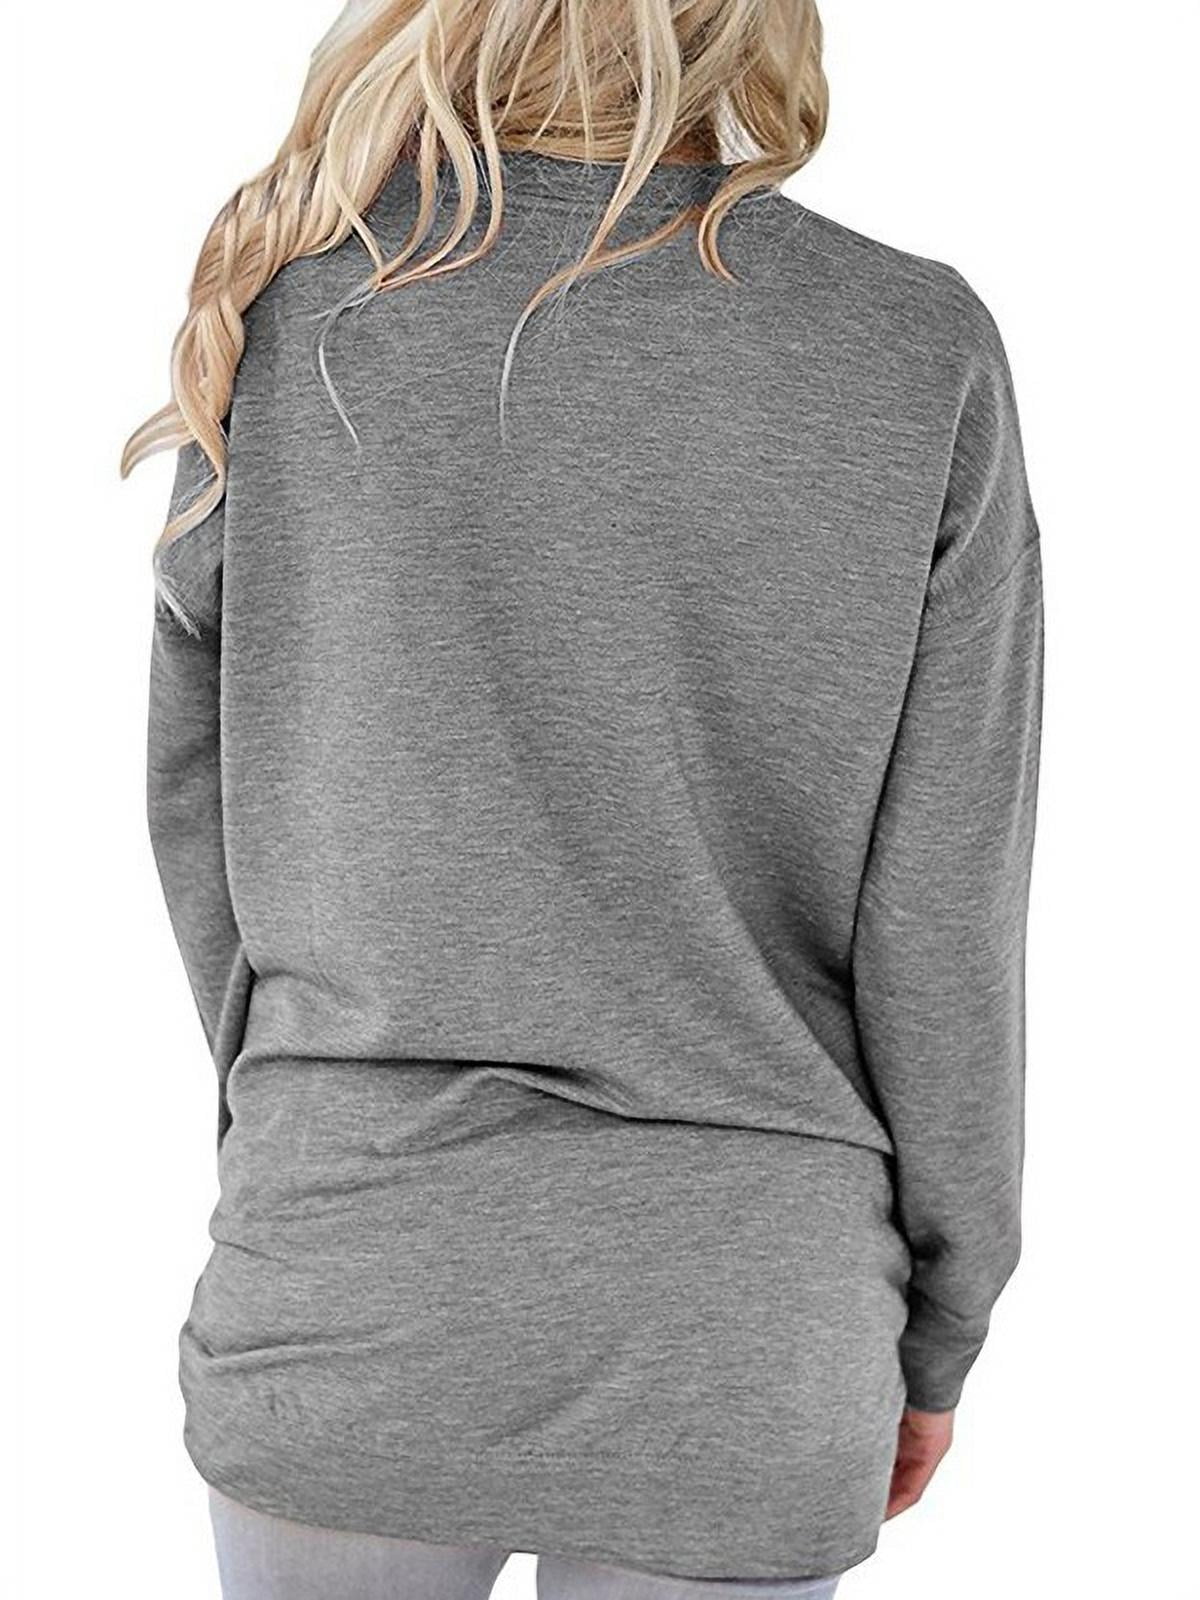 YESOT Hoodie Sweatshirt for Womens Long Sleeve Daily Hooded Pullover Pure Color Tops Blouse with Pocket 